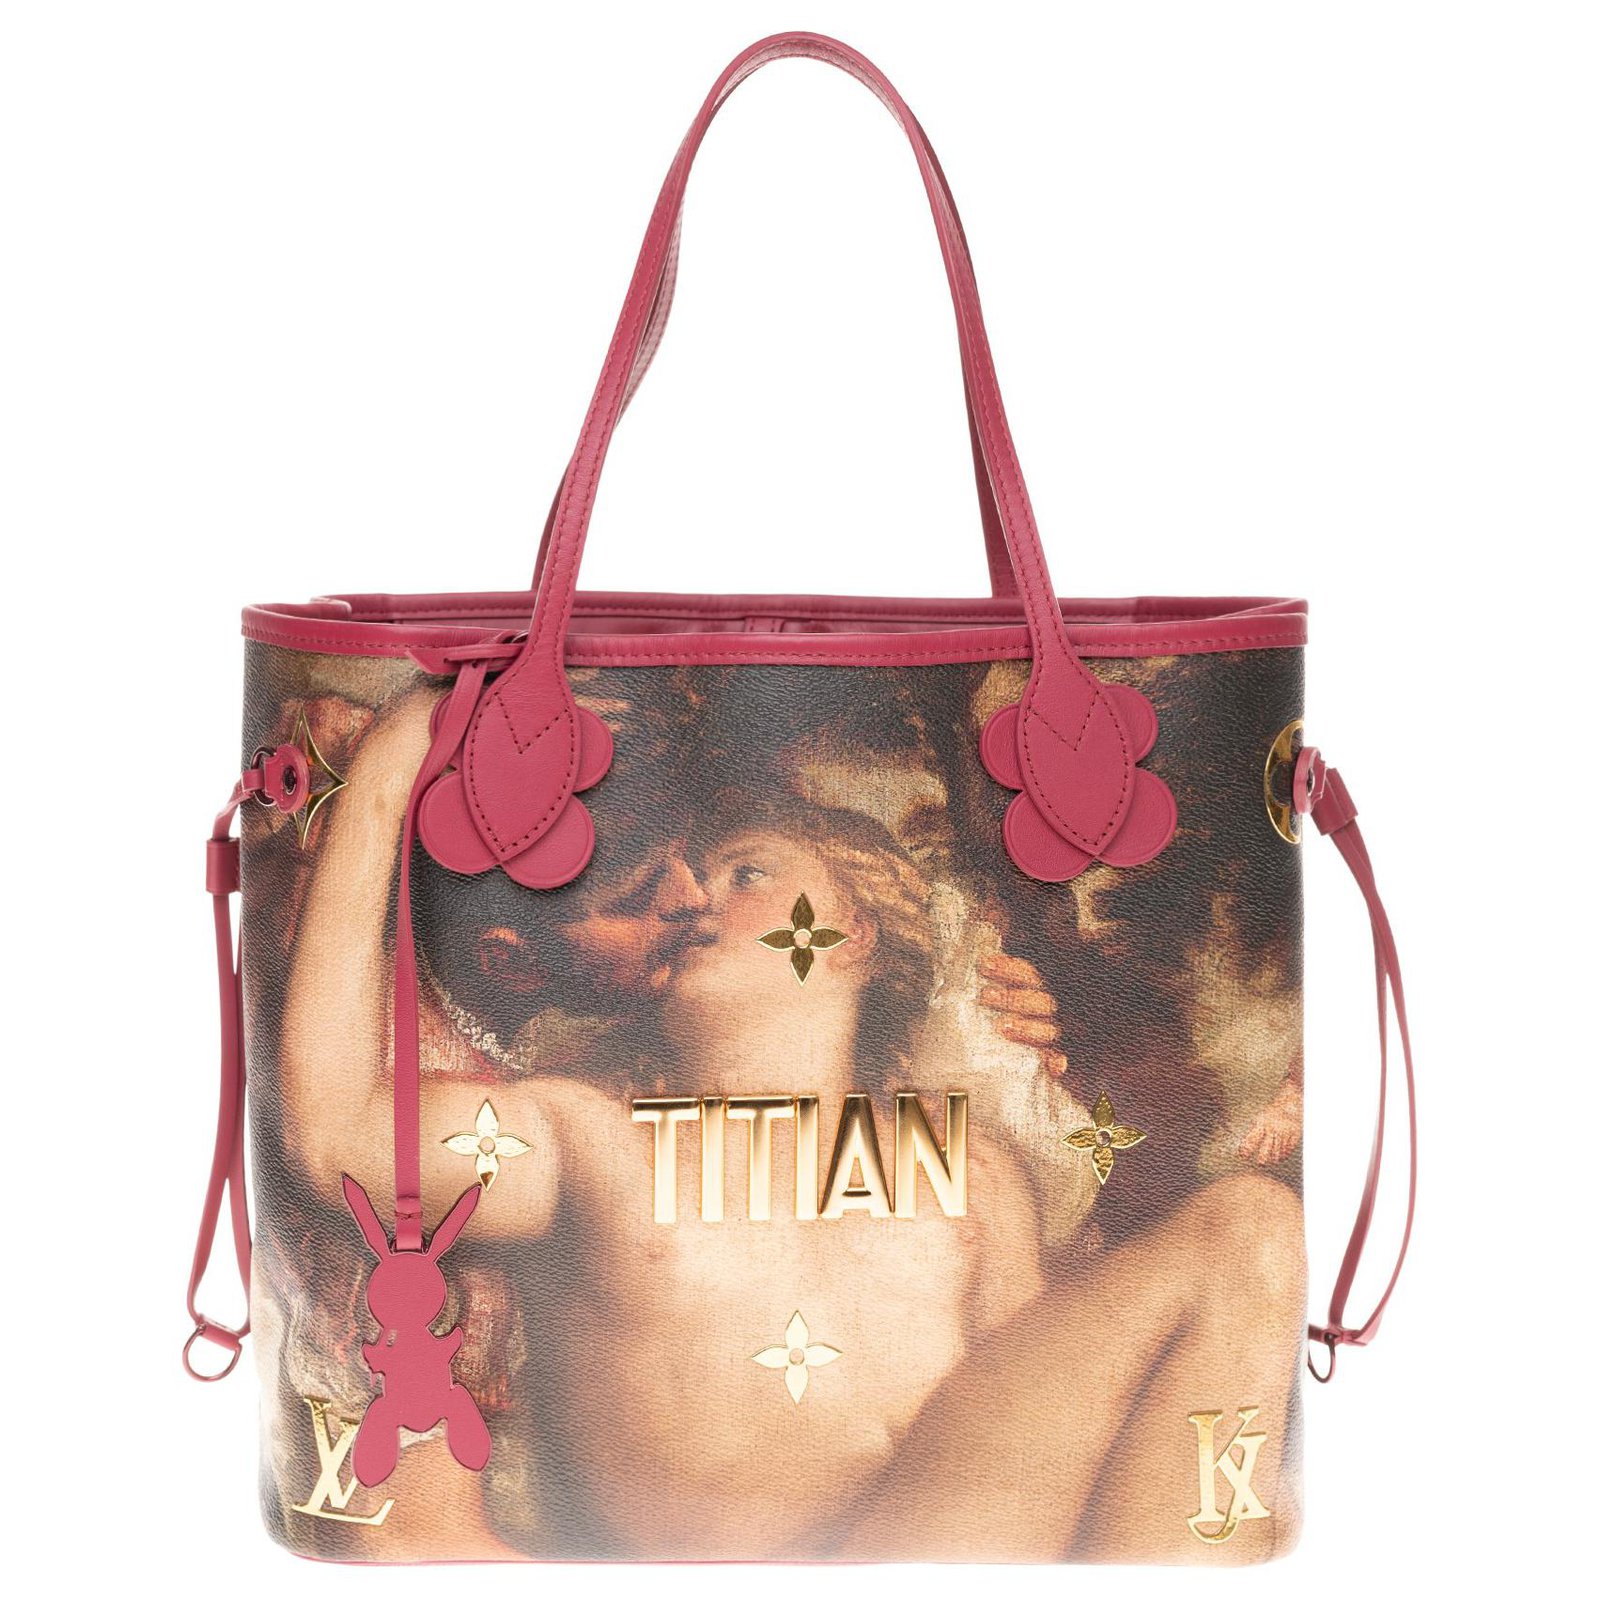 Louis Vuitton Neverfull limited edition Titian by Jeff Koons in